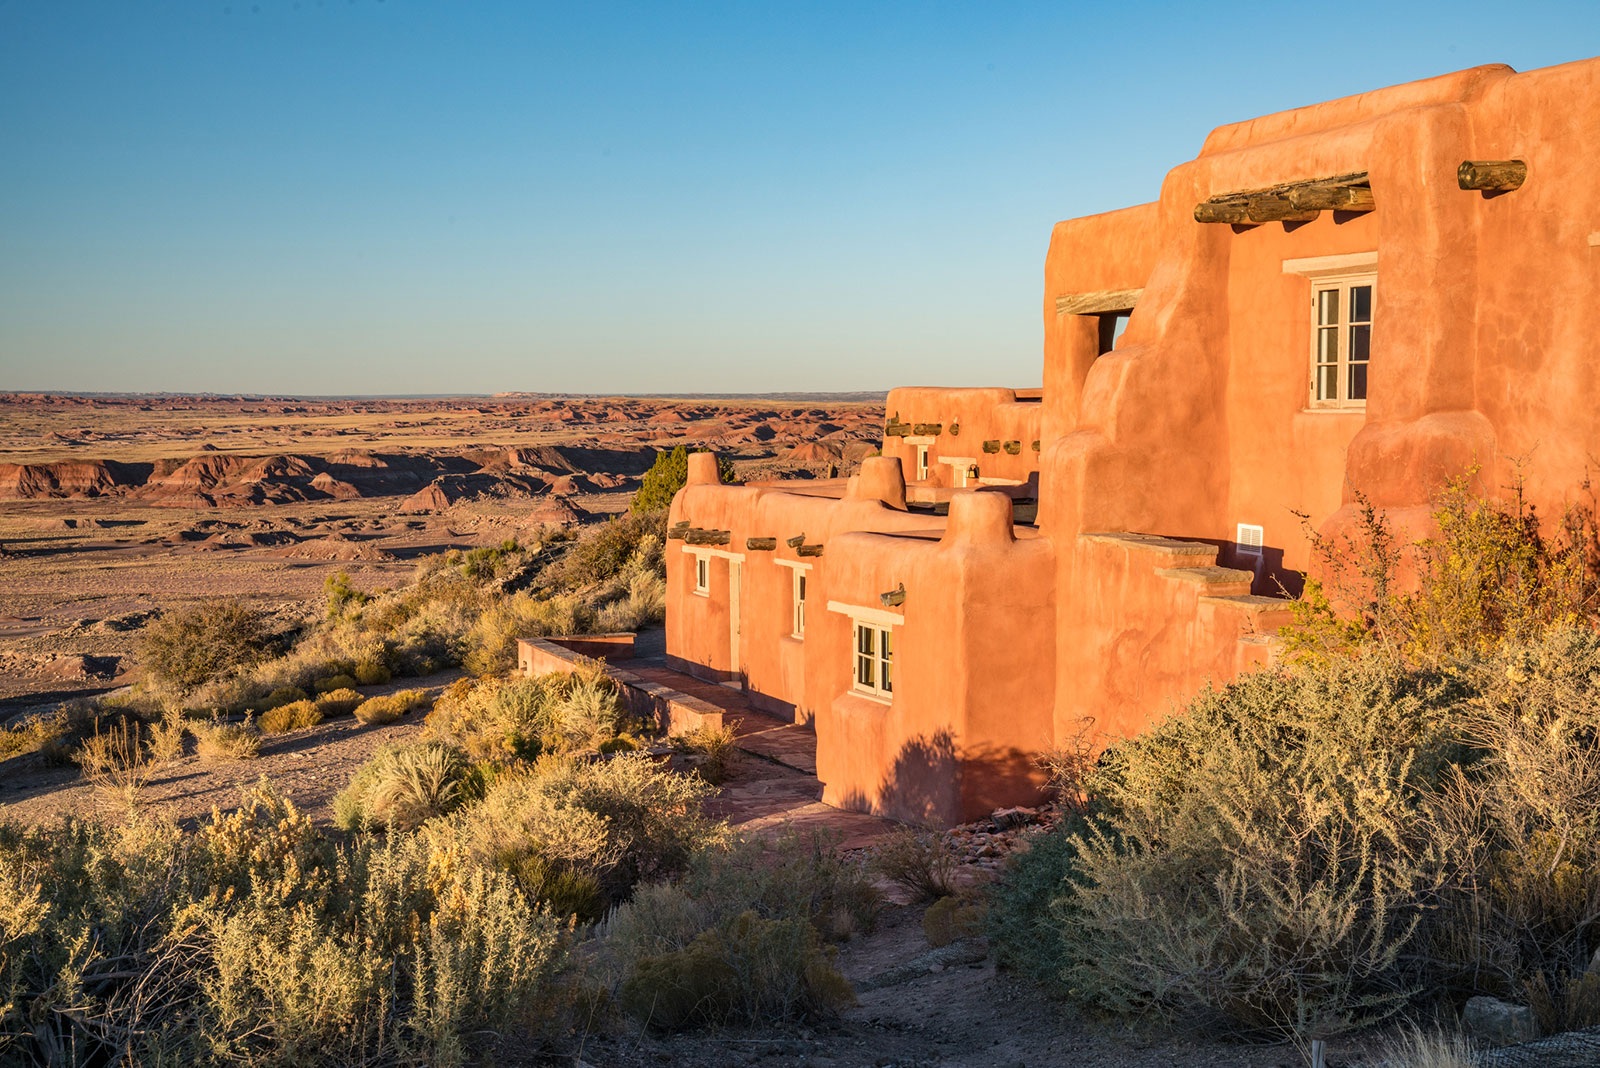 The stucco exterior of the Painted Desert Inn in Arizona's Petrified Forest National Park